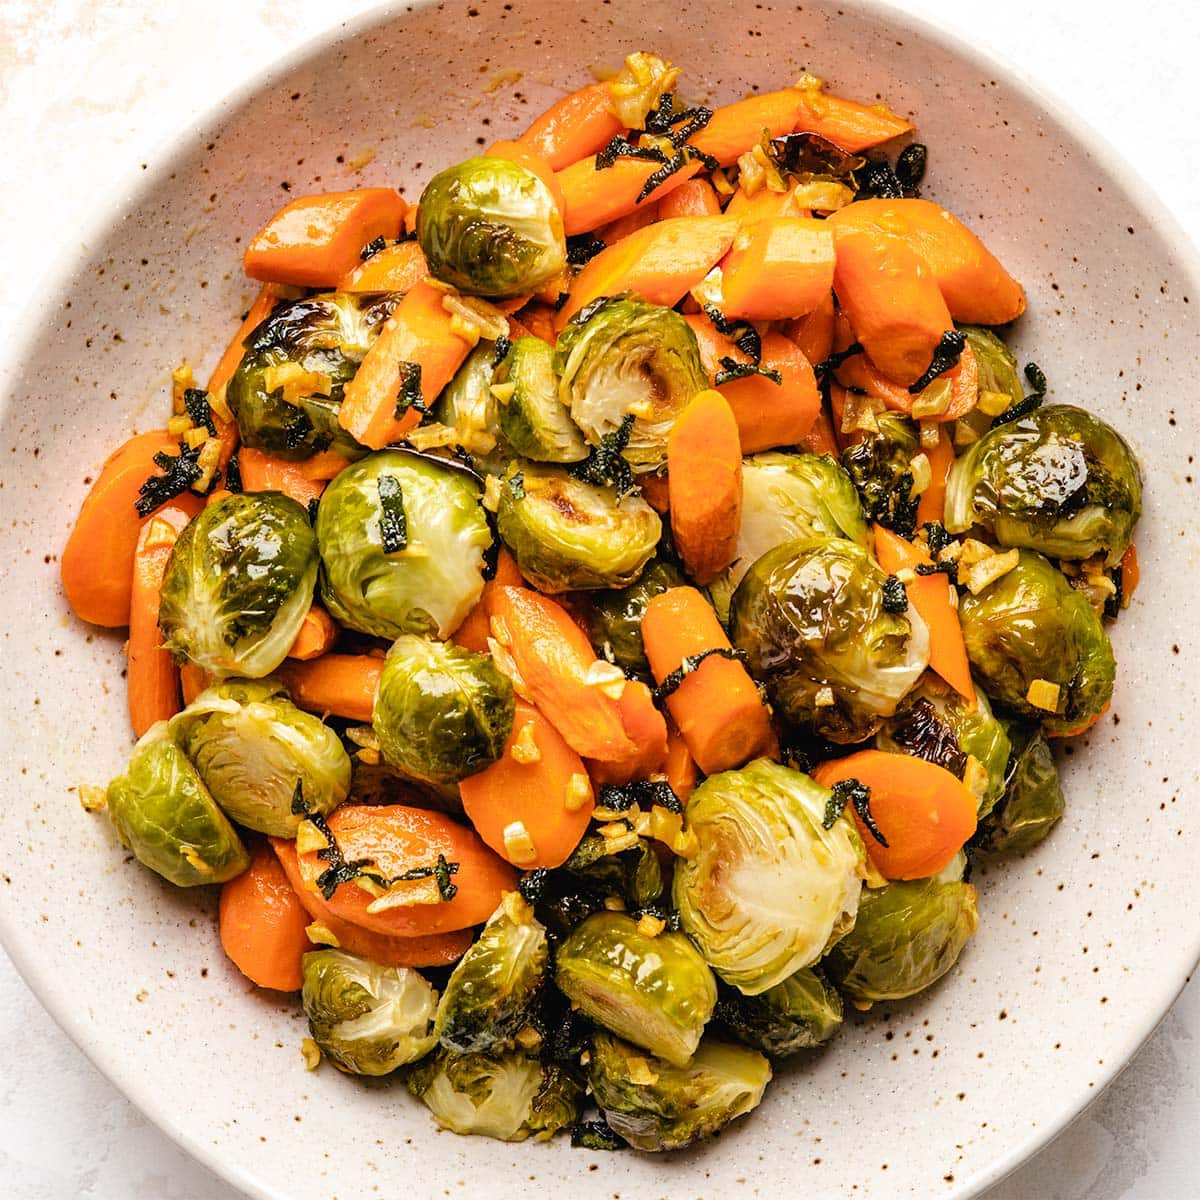 Roasted Carrots and Brussels Sprouts ⋆ 5 Ingredients, Under 30 Minutes!